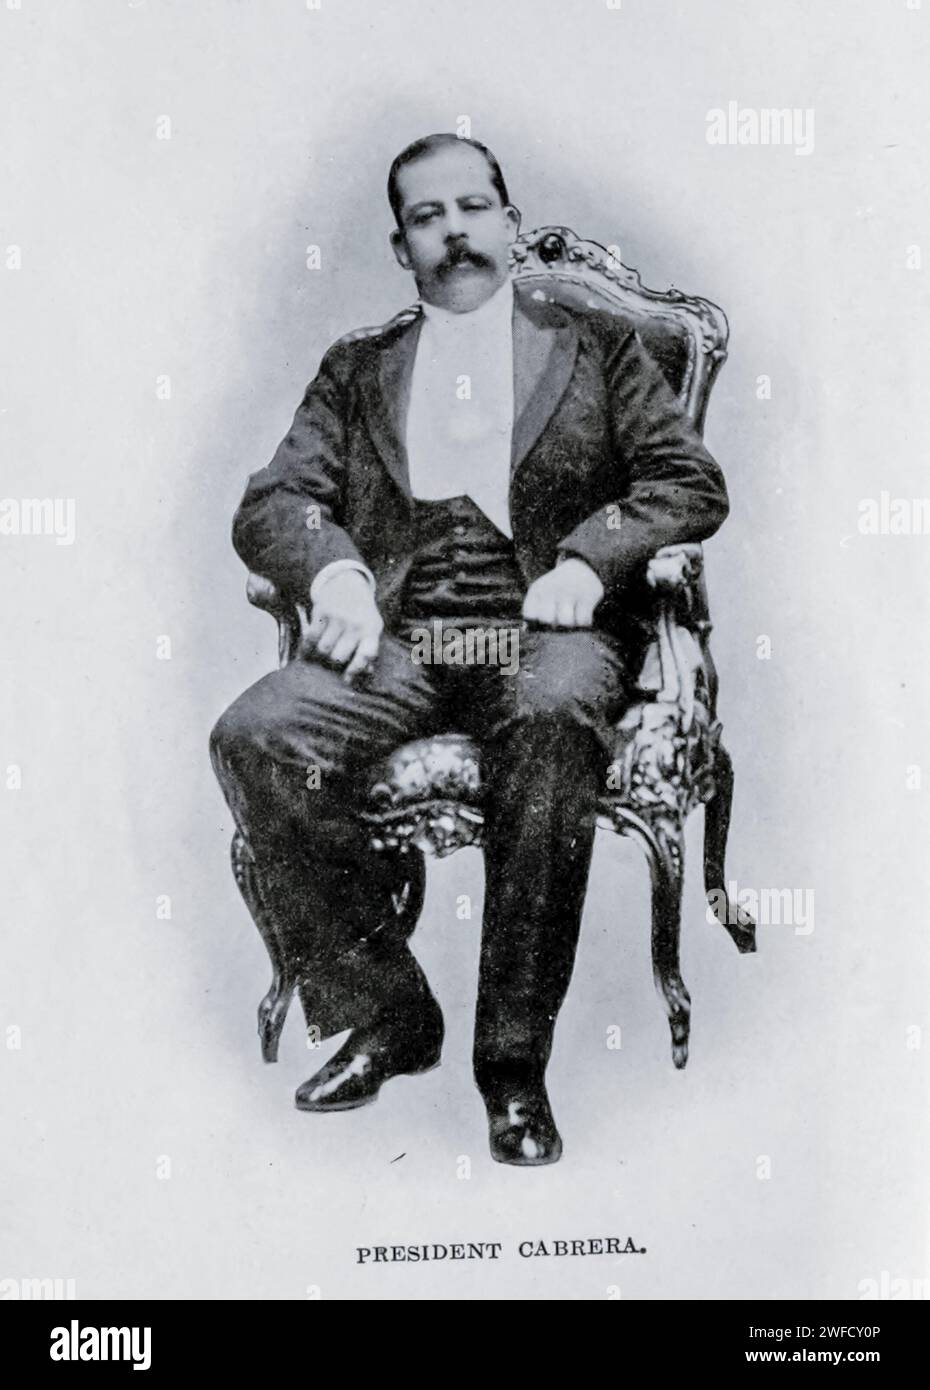 Manuel José Estrada Cabrera (21 November 1857 – 24 September 1924) was the President of Guatemala from 1898 to 1920. A lawyer with no military background, he was a dictator who modernised the country's industry and transportation infrastructure, but only via granting concessions to the American-owned United Fruit Company, whose influence on the government was deeply unpopular among the population. Estrada Cabrera used increasingly brutal methods to assert his authority, including armed strike-breaking, and he effectively controlled the general elections. He retained power for 22 years through Stock Photo